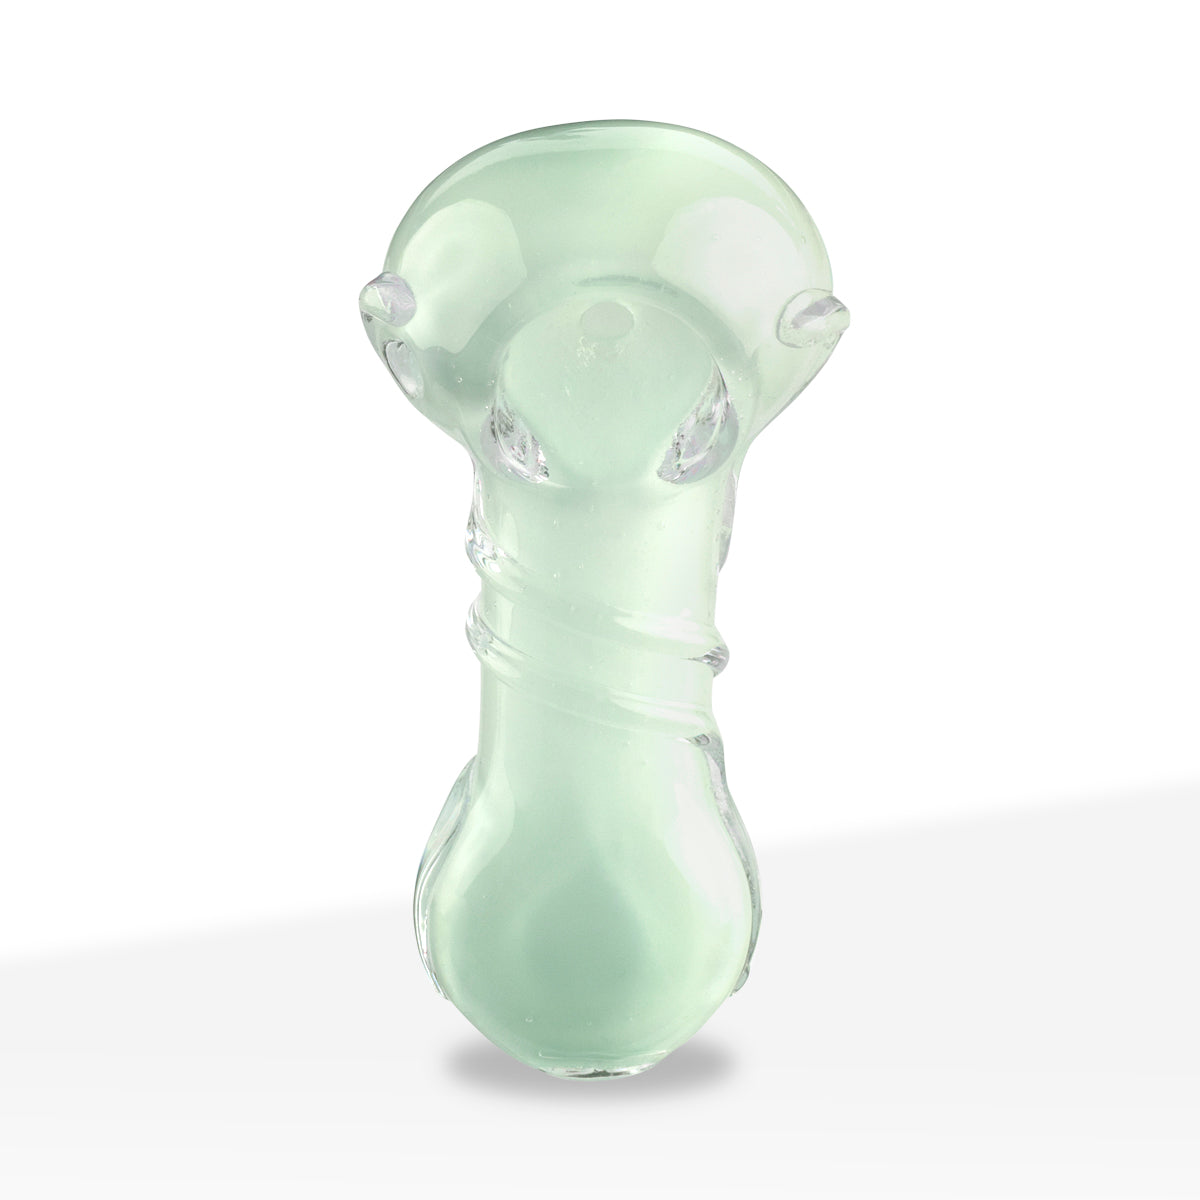 Hand Pipe | Classic Glass Spoon Slyme Swirl Hand Pipe | 3.5" - Glass - 3 Pack